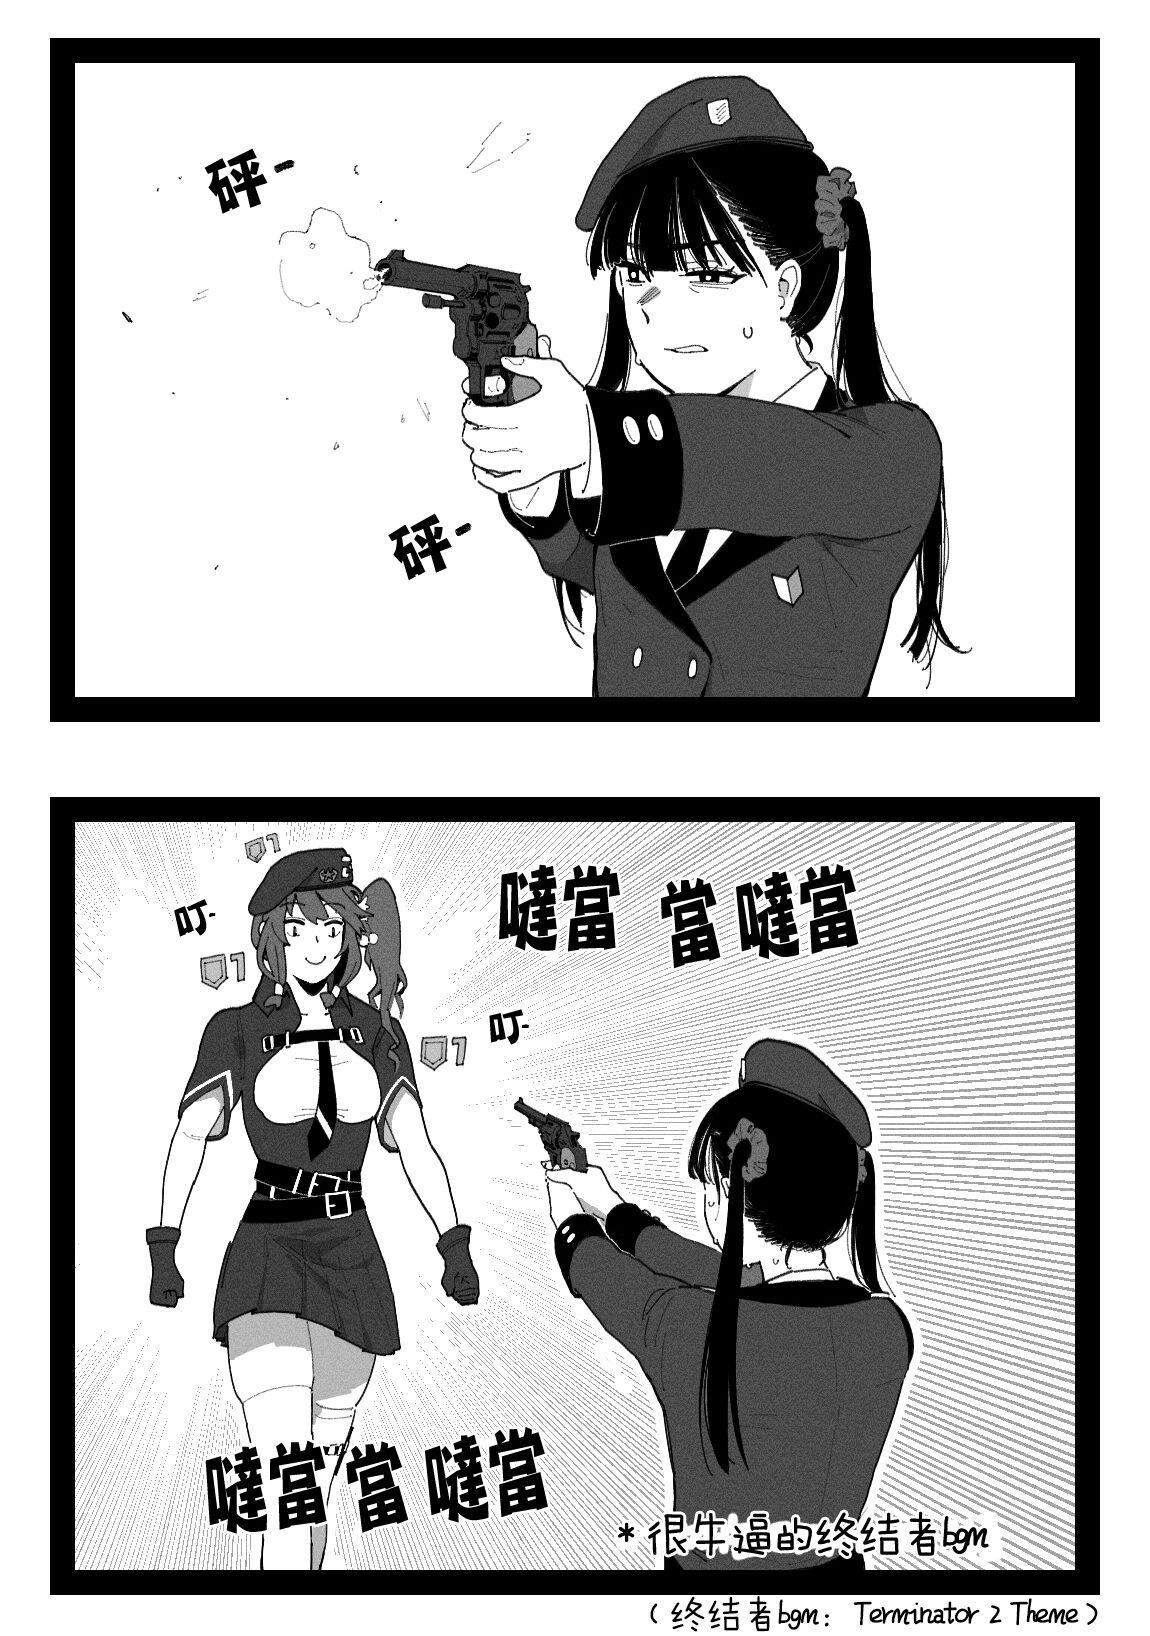  Griffin Commanders - Girls frontline Cum On Face - Page 10